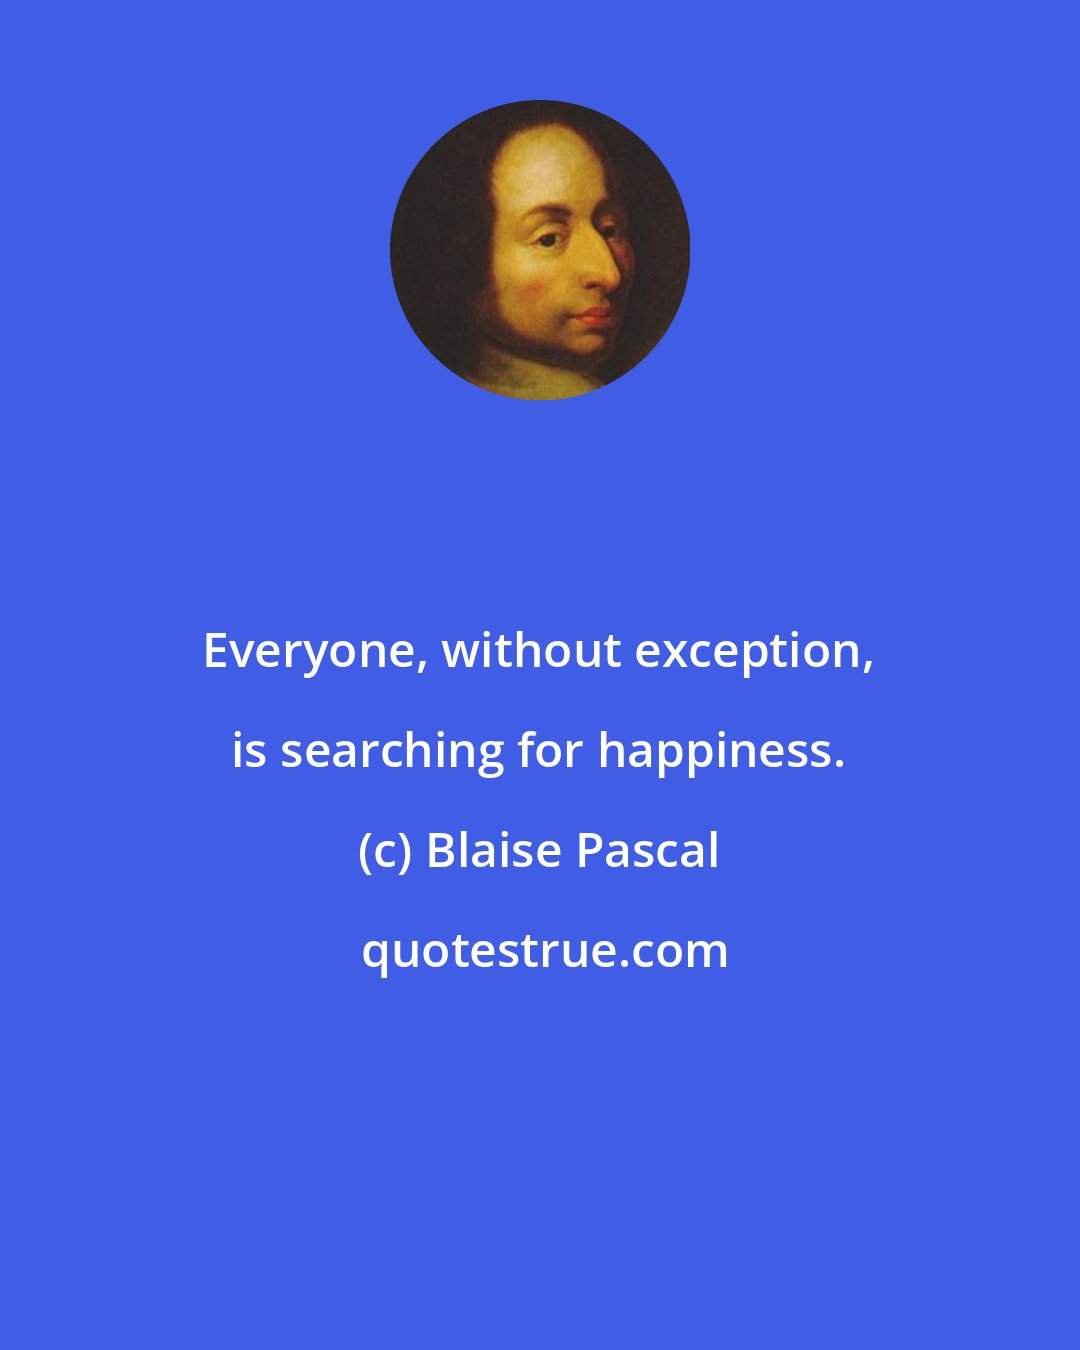 Blaise Pascal: Everyone, without exception, is searching for happiness.